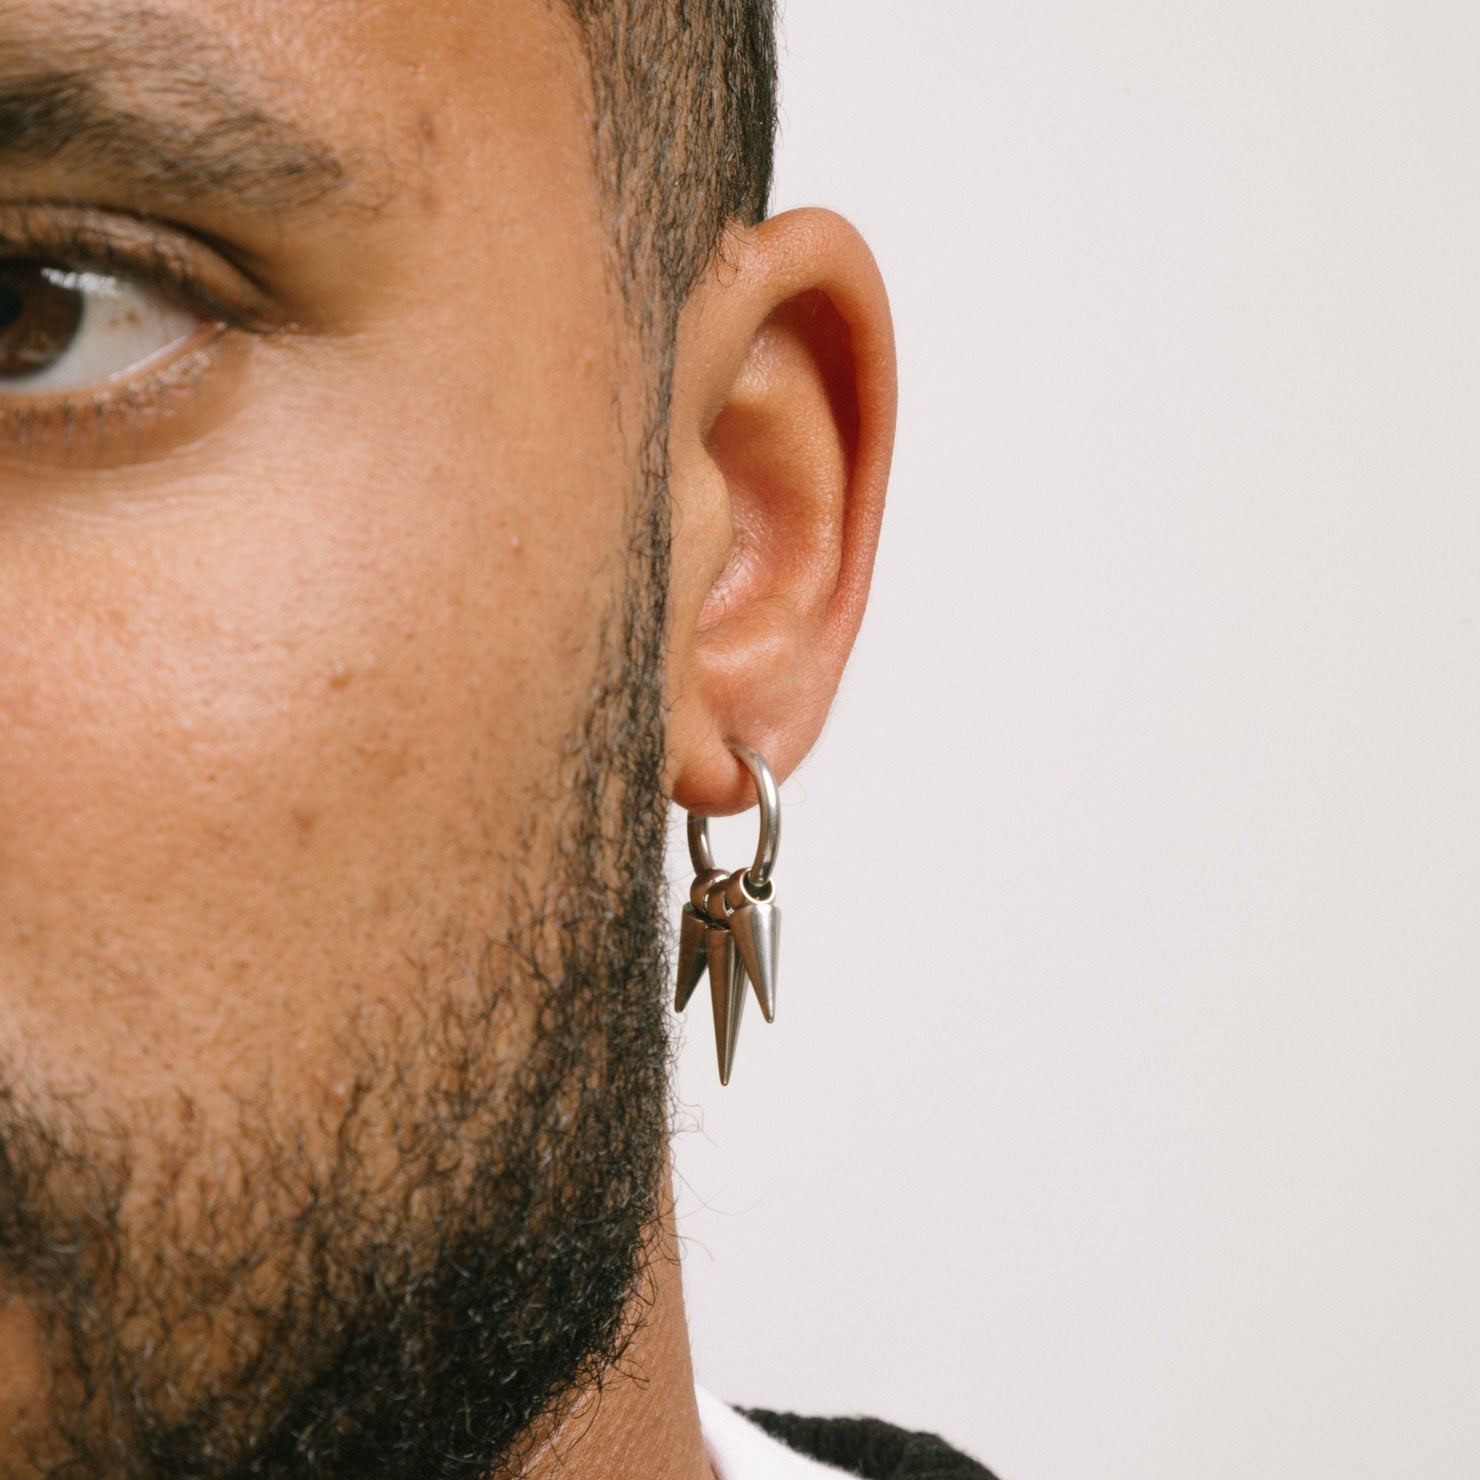 A model wearing the Triple Dangle Clip-On Earrings feature sliding spring closure, ideal for those with smaller or thinner ear lobes. Average comfortable wear duration estimated at 2 - 4 hours, with a secure hold. Earrings also have adjustable mechanism to ensure proper fit to ear thickness. Crafted with stainless steel, comes in one pair.